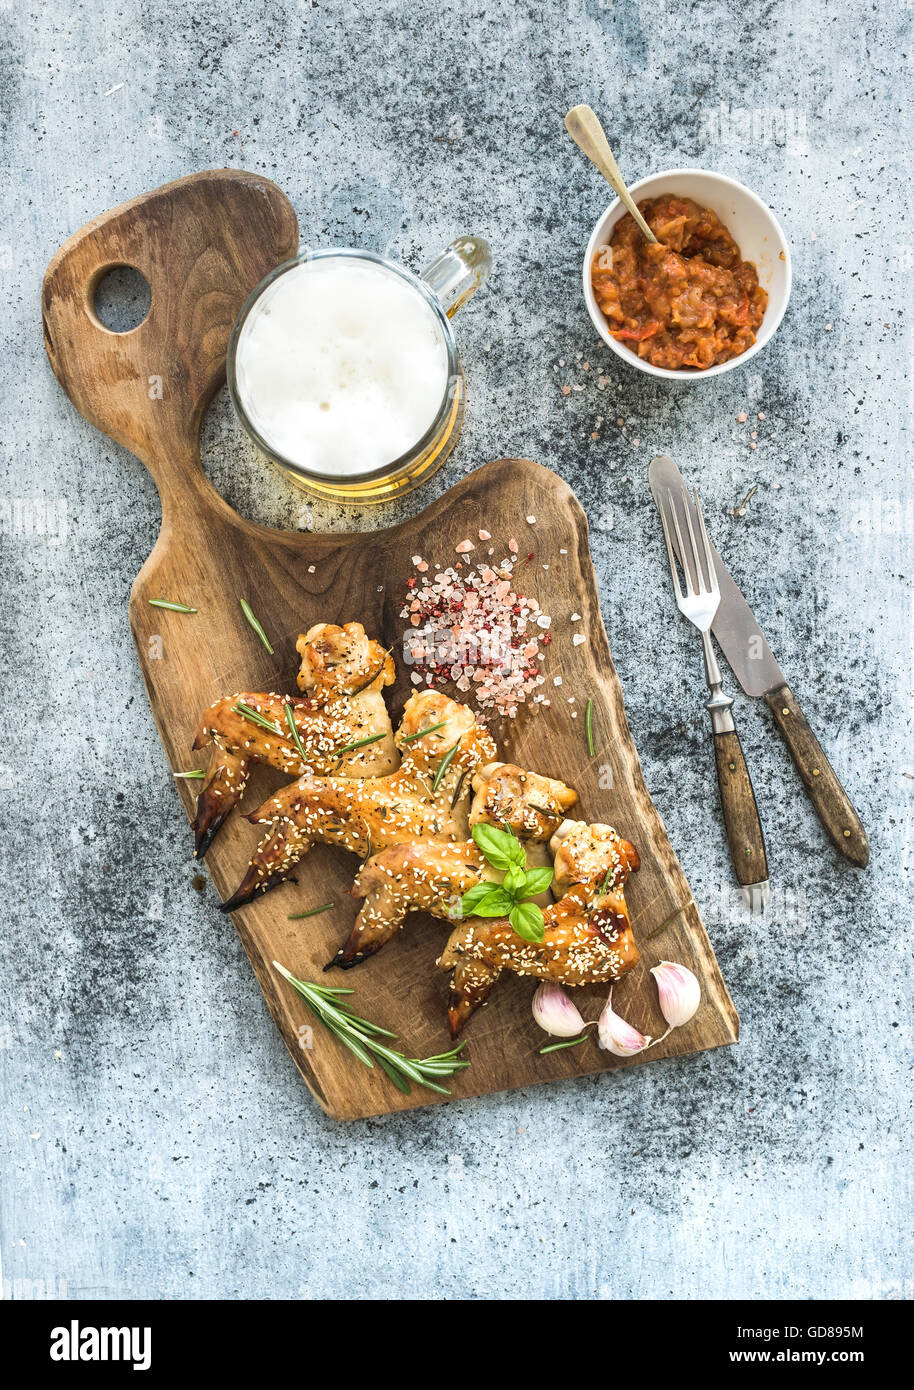 Grilled chicken wings with seasam, spices and herbs, glass of beer and tomato sauce on rustic wooden board over light concrete b Stock Photo